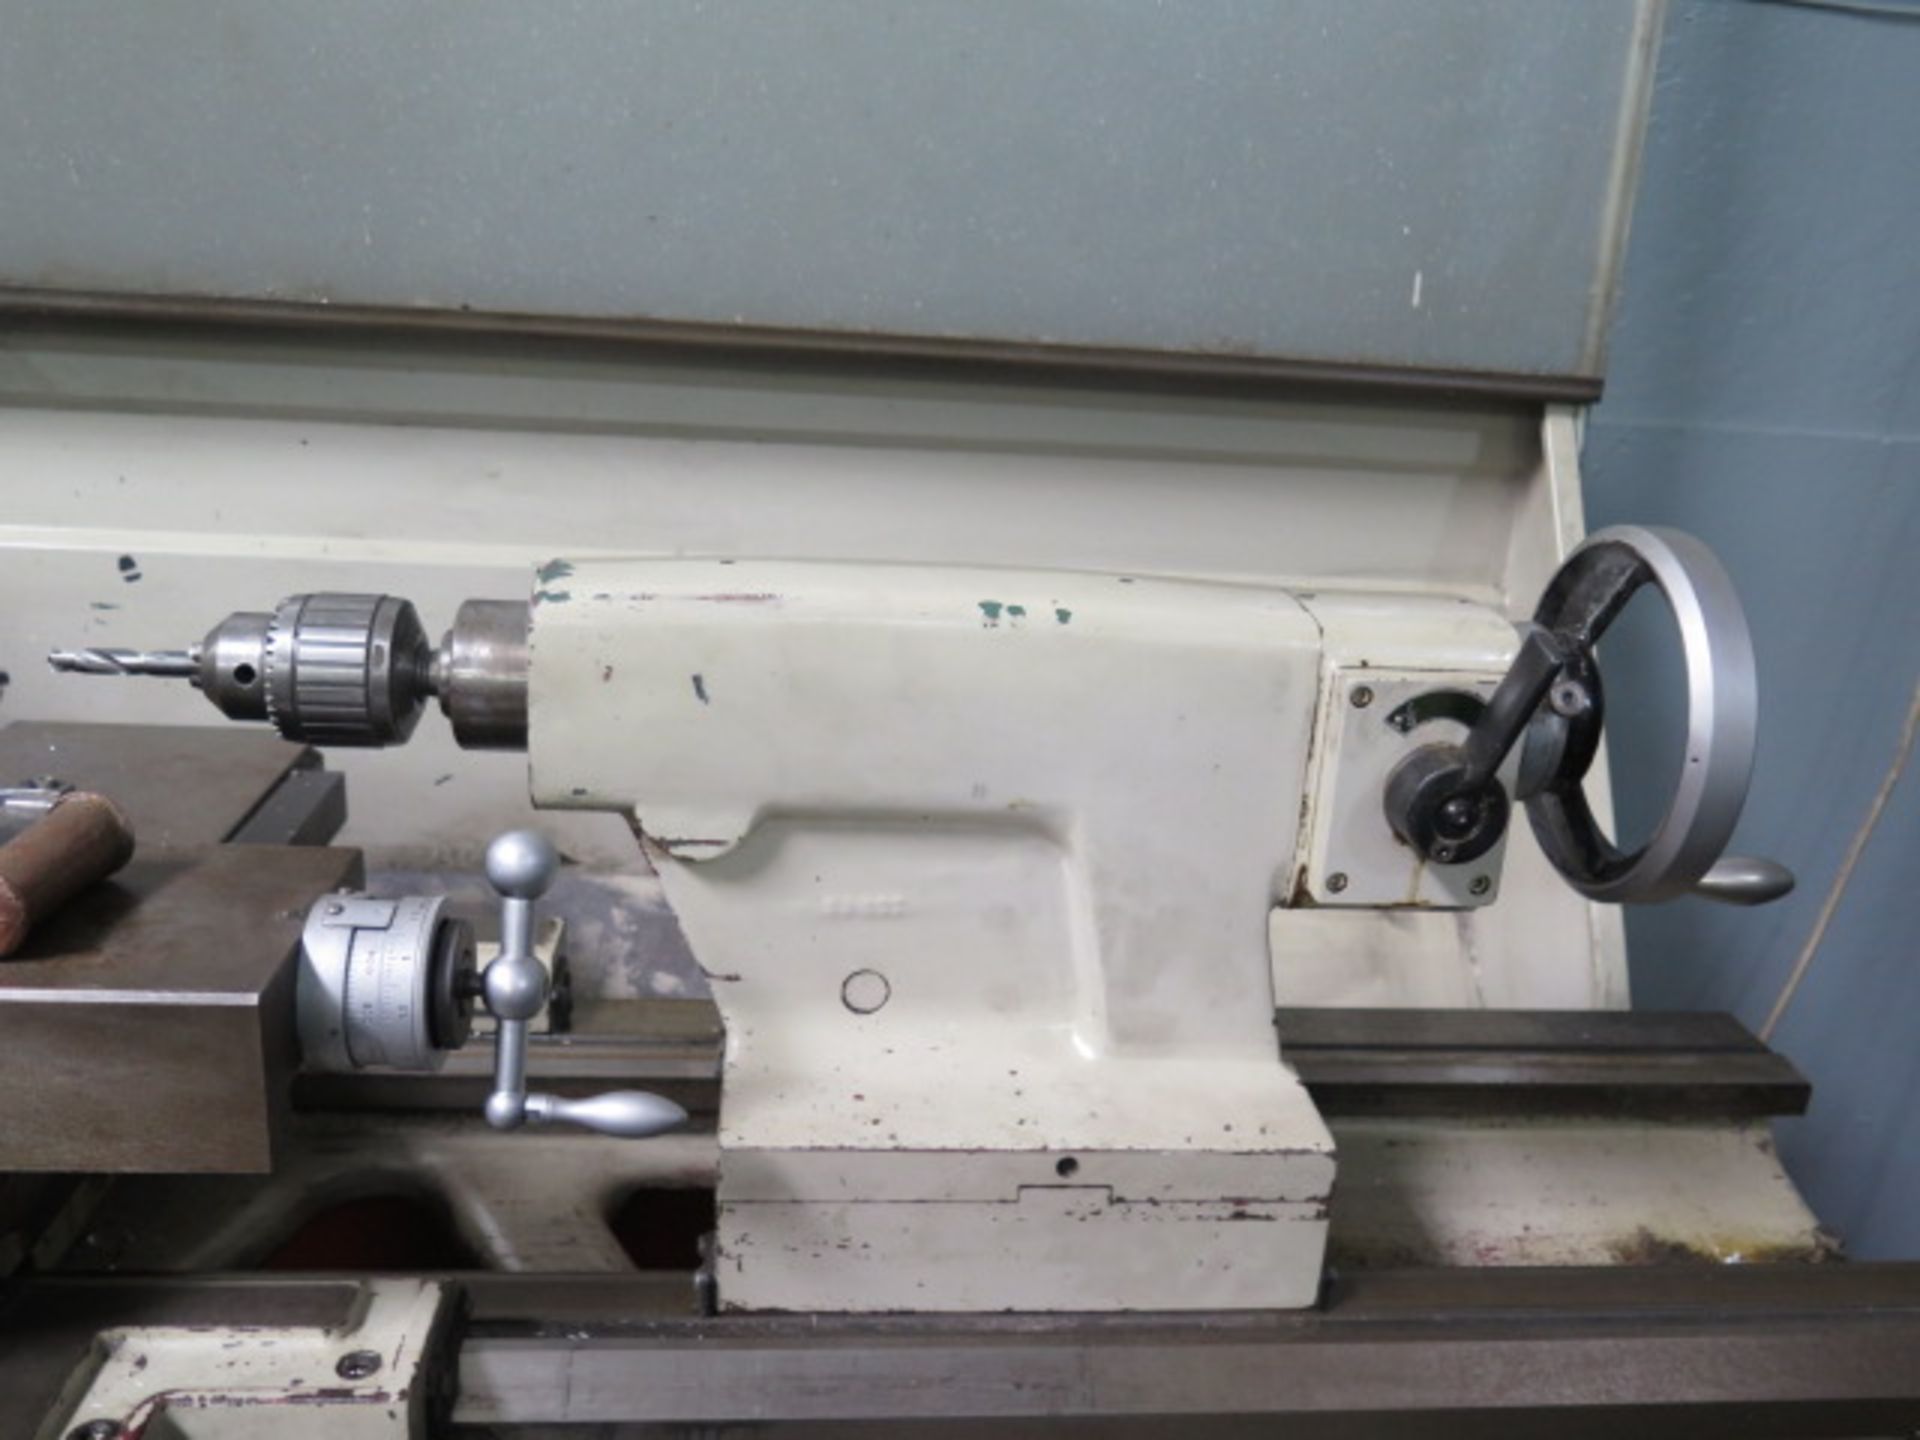 Supermax LG2236G 22" x 36" Geared Head Gap Bed Lathe w/ Sony DRO, 20-1550 RPM, Inch/mm, SOLD AS IS - Image 7 of 18